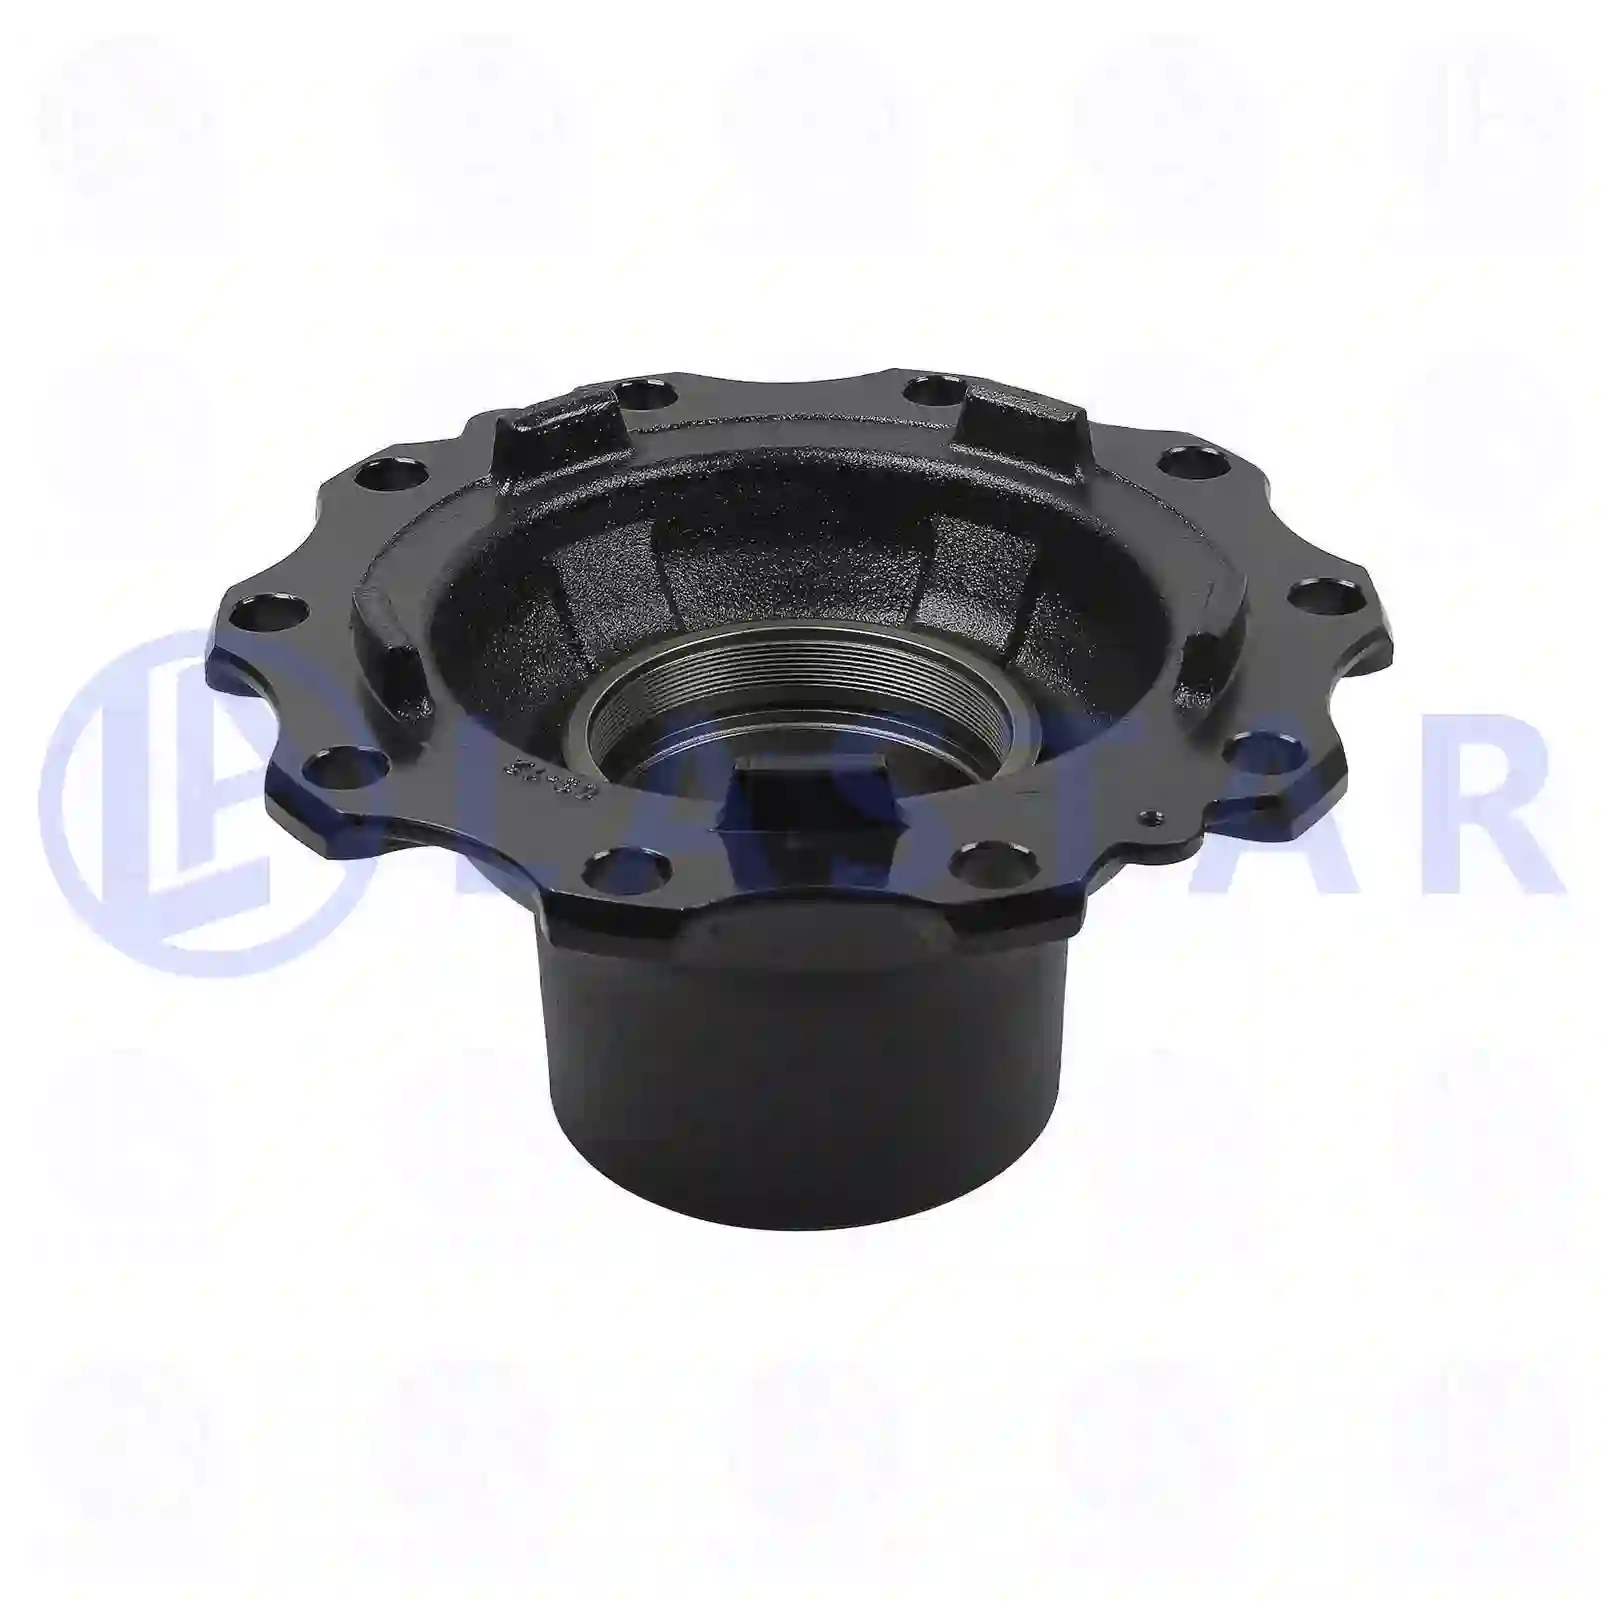 Wheel hub, without bearings, 77726963, 1864428, 2085471, 2290532, , , , ||  77726963 Lastar Spare Part | Truck Spare Parts, Auotomotive Spare Parts Wheel hub, without bearings, 77726963, 1864428, 2085471, 2290532, , , , ||  77726963 Lastar Spare Part | Truck Spare Parts, Auotomotive Spare Parts